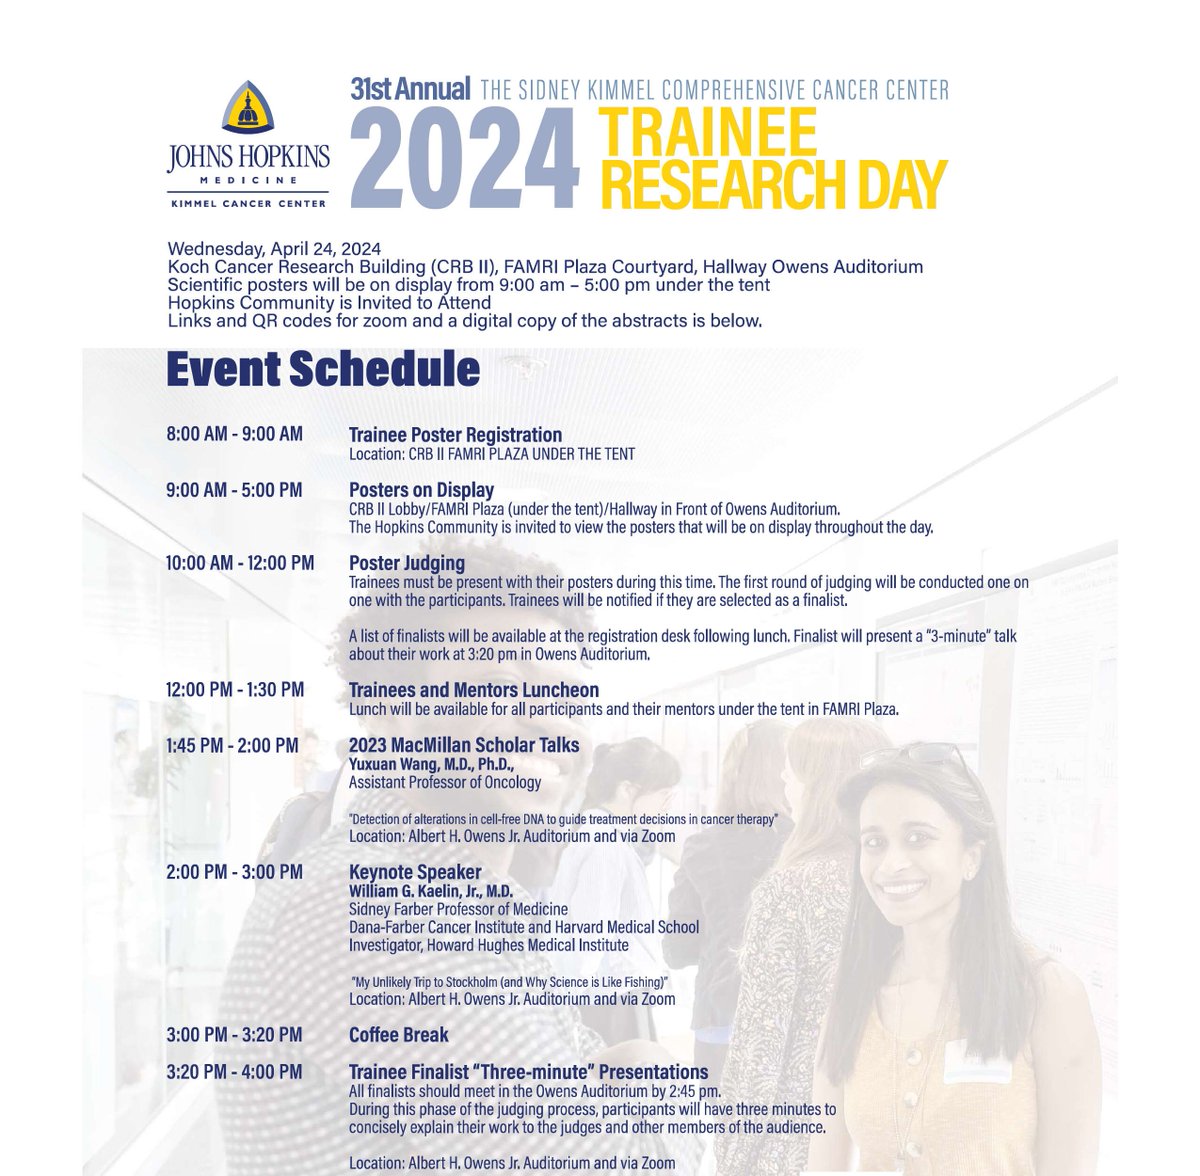 Join us for @hopkinskimmel Trainee Research Day on April 24, 2024! The @MolecularOncLab @Hopkins_MTB young investigators will be showcasing their work at the FAMRI Plaza Courtyard outside CRB II. Stop by & learn about #liquidbiopsies #cancergenomics #immunotherapy #biomarkers